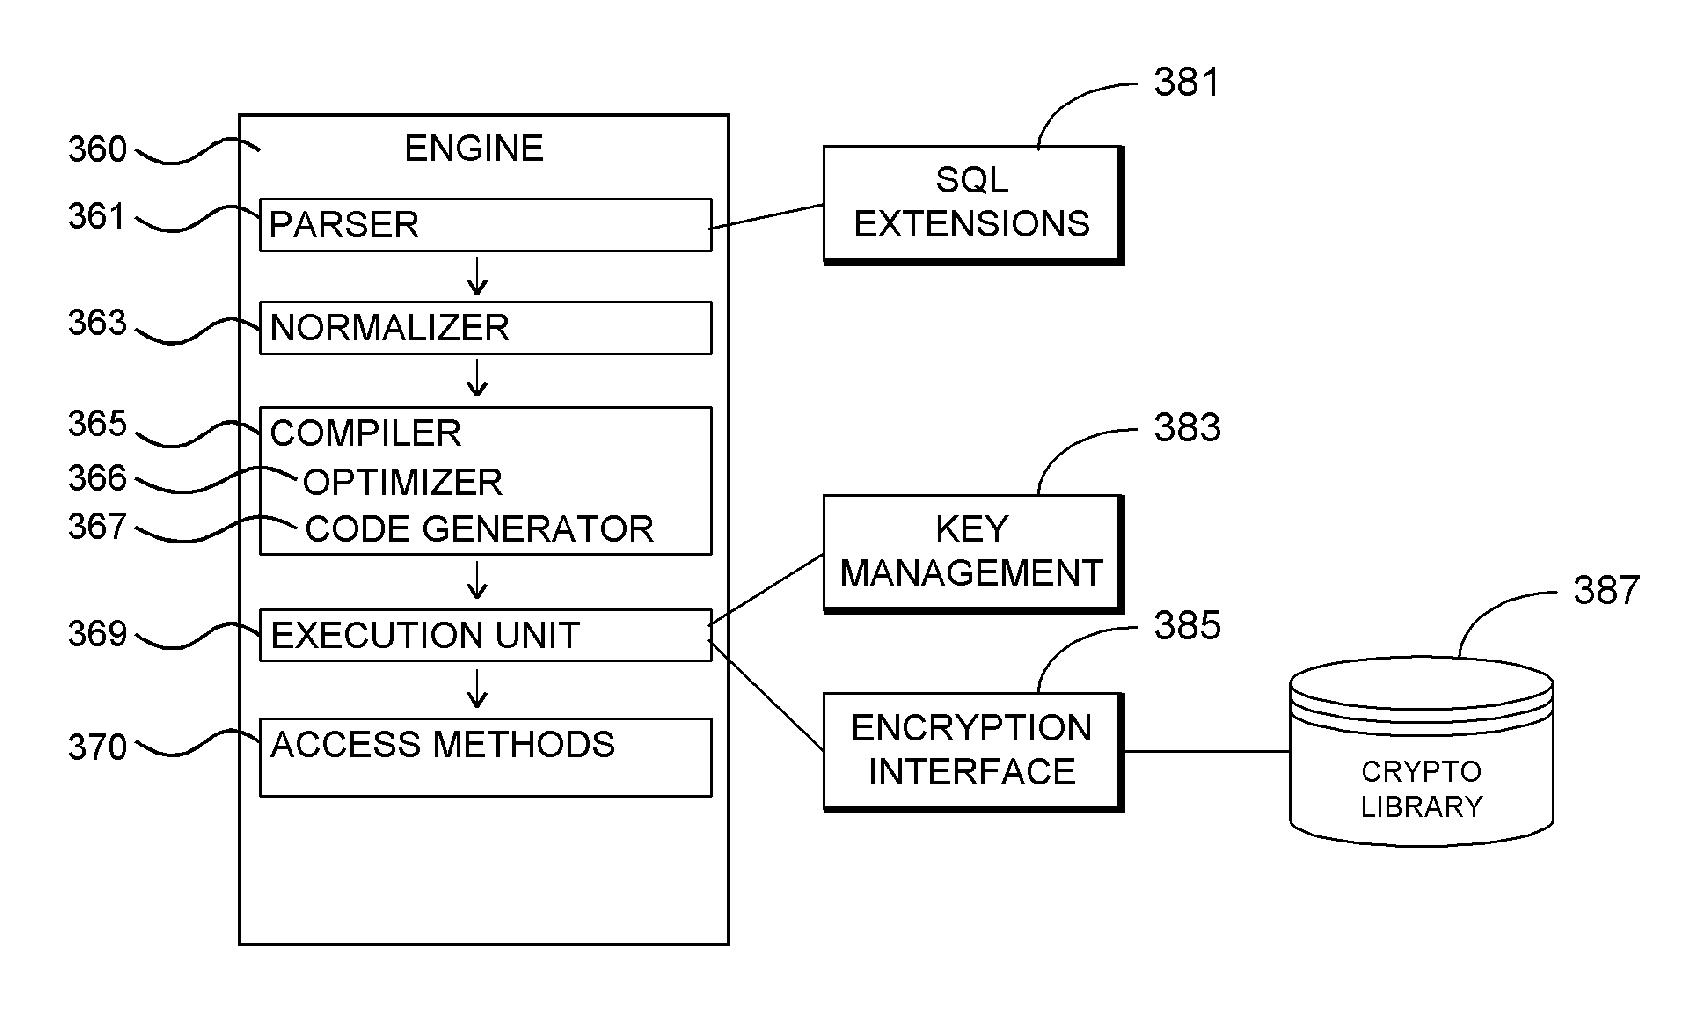 Database system providing SQL extensions for automated encryption and decryption of column data